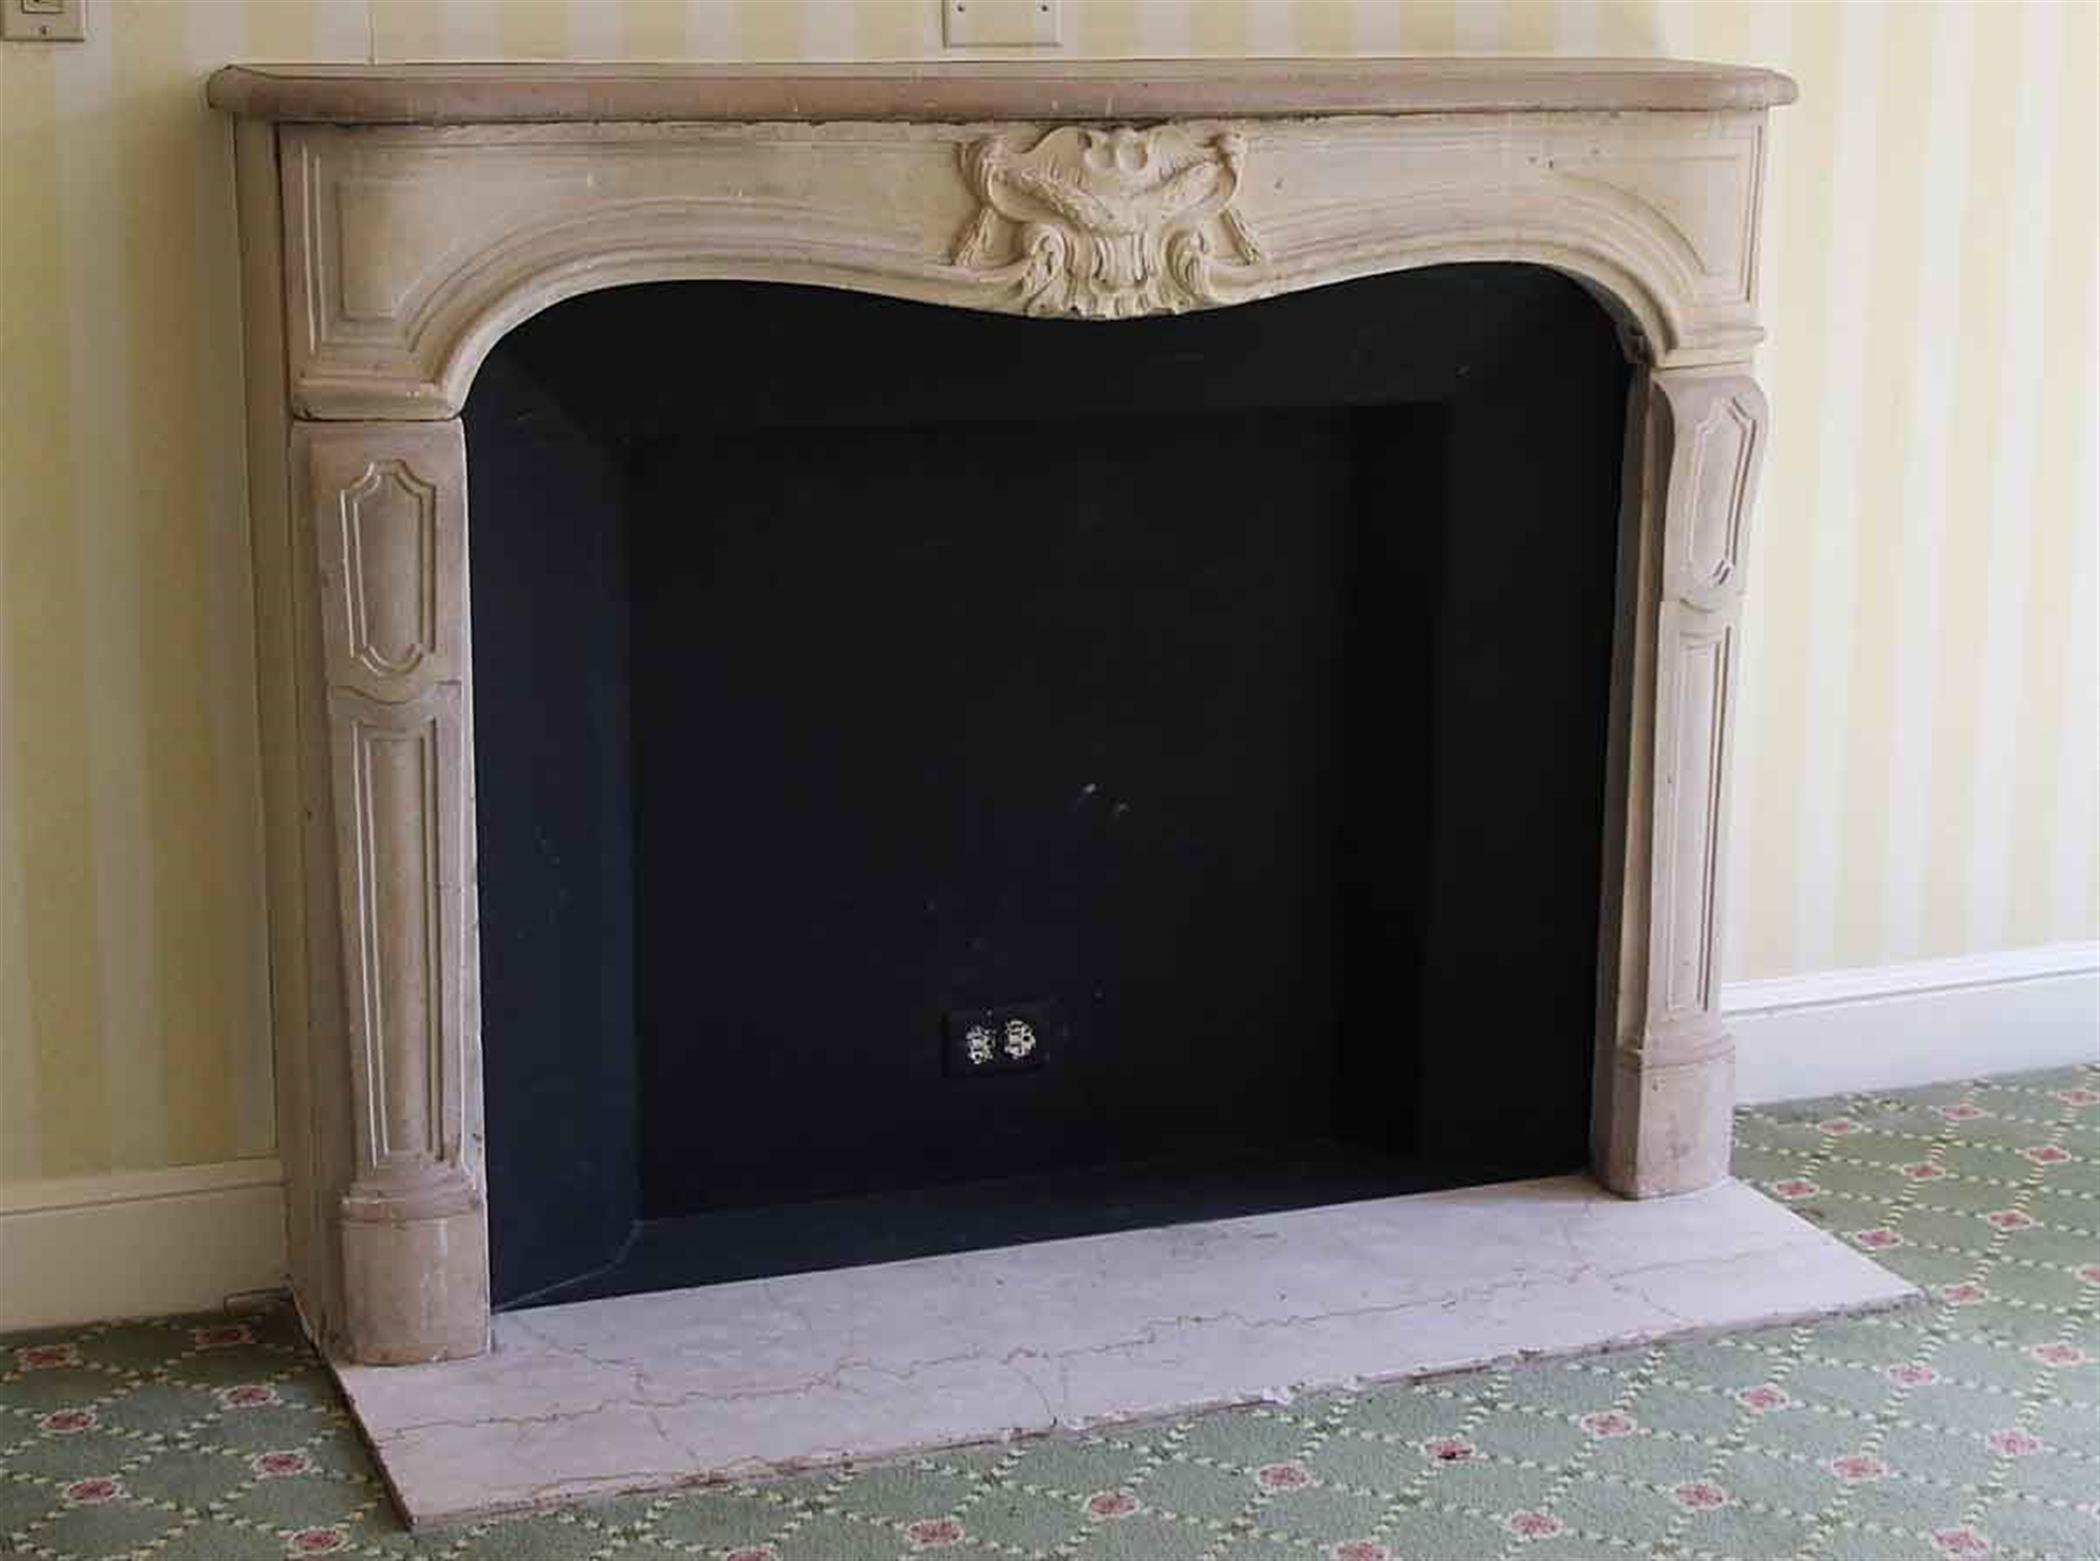 Louis XV carved limestone mantel with its hearth. This mantel was imported from Europe and installed in the Waldorf Astoria Hotel of Park Avenue, New York City in the early 1930s. The stone is in good condition. This mantel is original to suite Y on